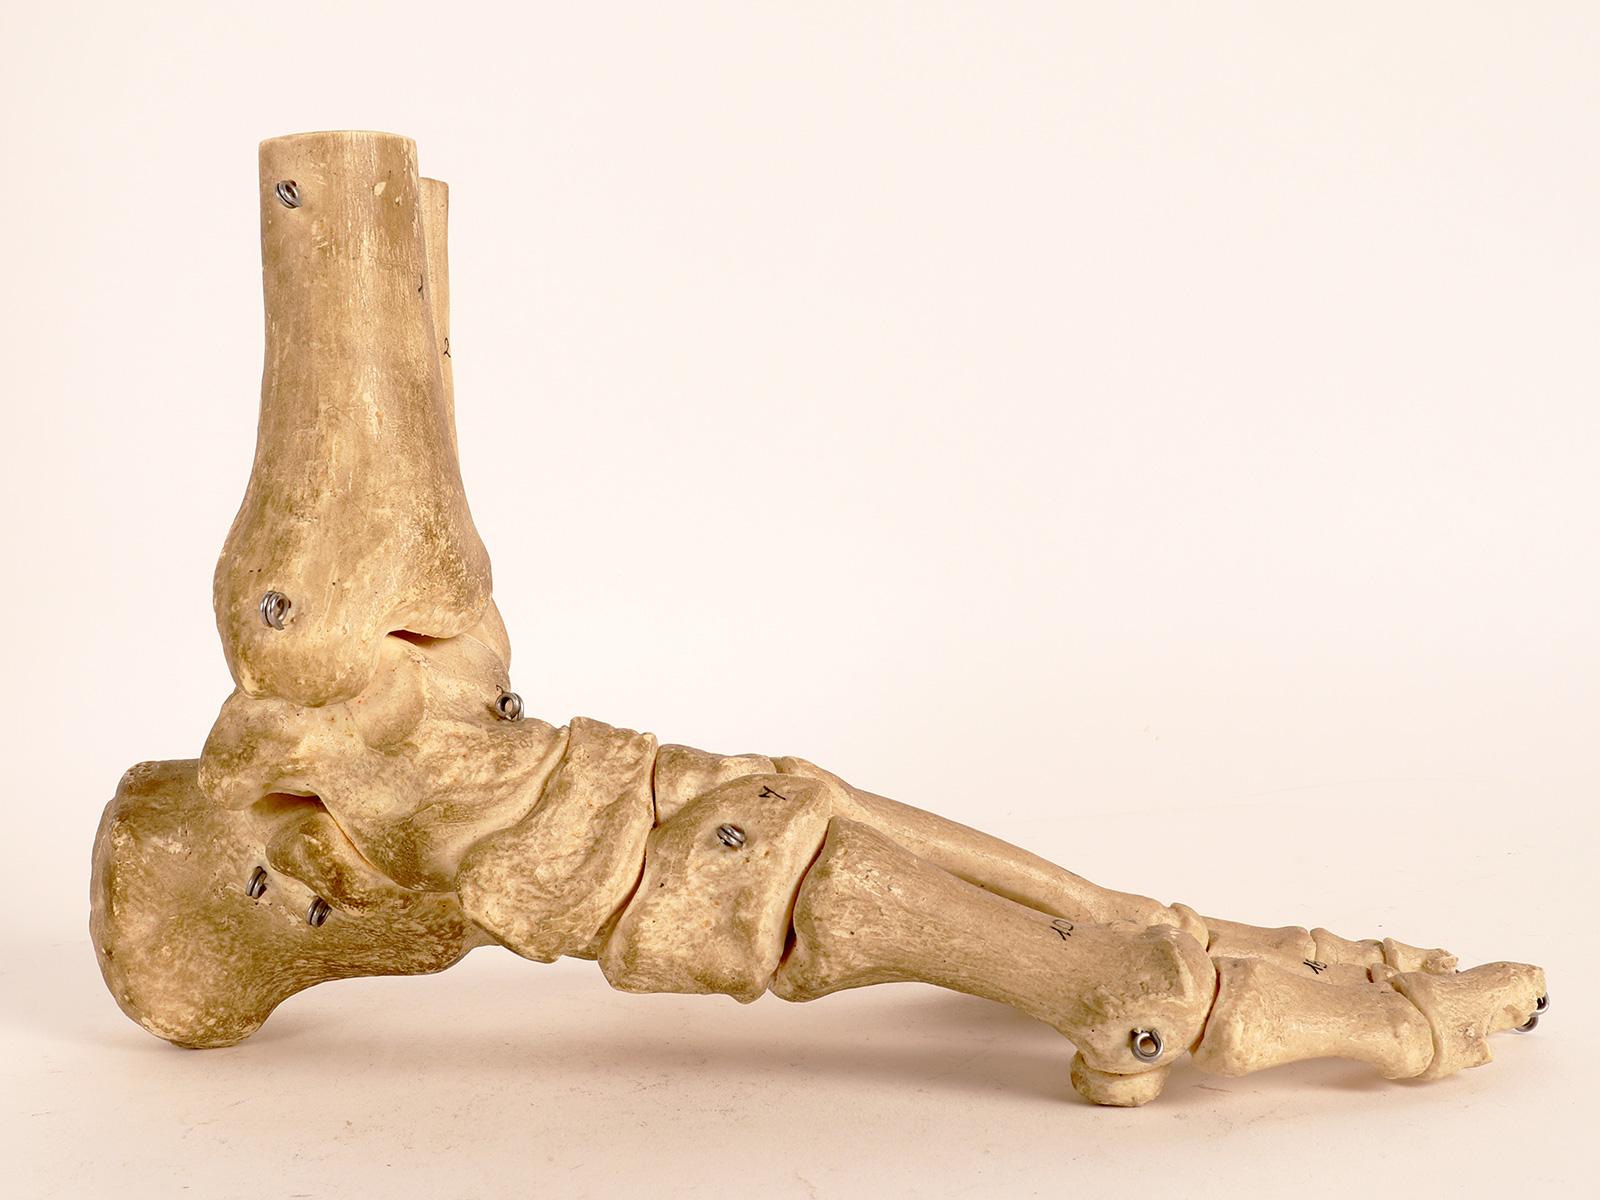 Anatomical model depicting the skeletal part of a foot, made by Somso, Sonenberg. Germany, circa 1970.